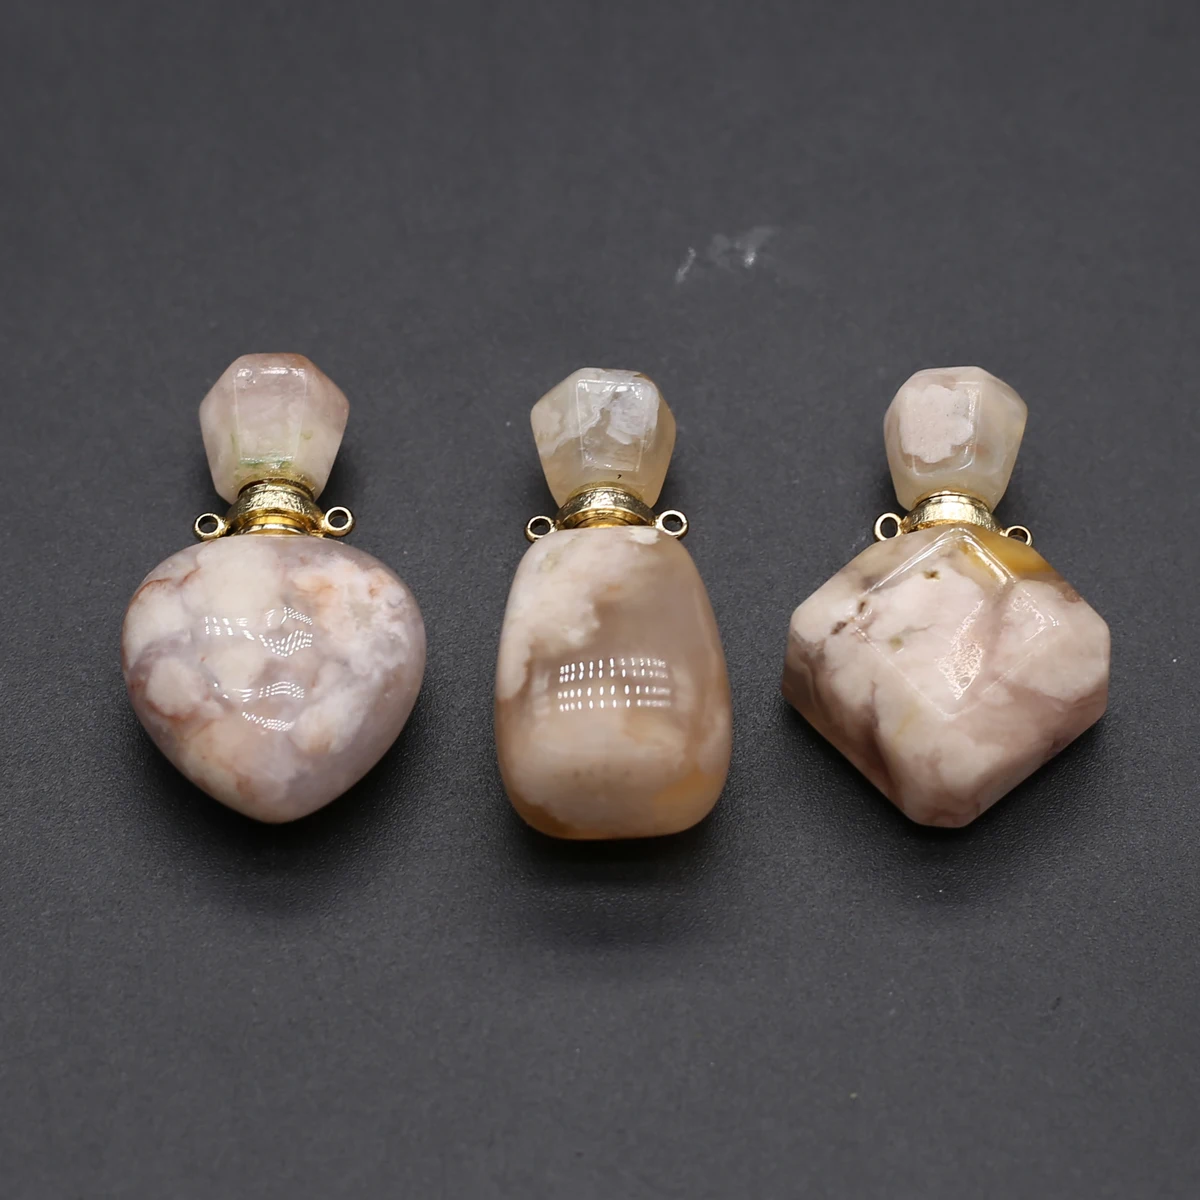 

Cherry Blossom Agate Natural Stone Heart Rhombus Perfume Bottle Pendant Diffuser For Jewelry MakingDIY Accessories Charm Gift3PC